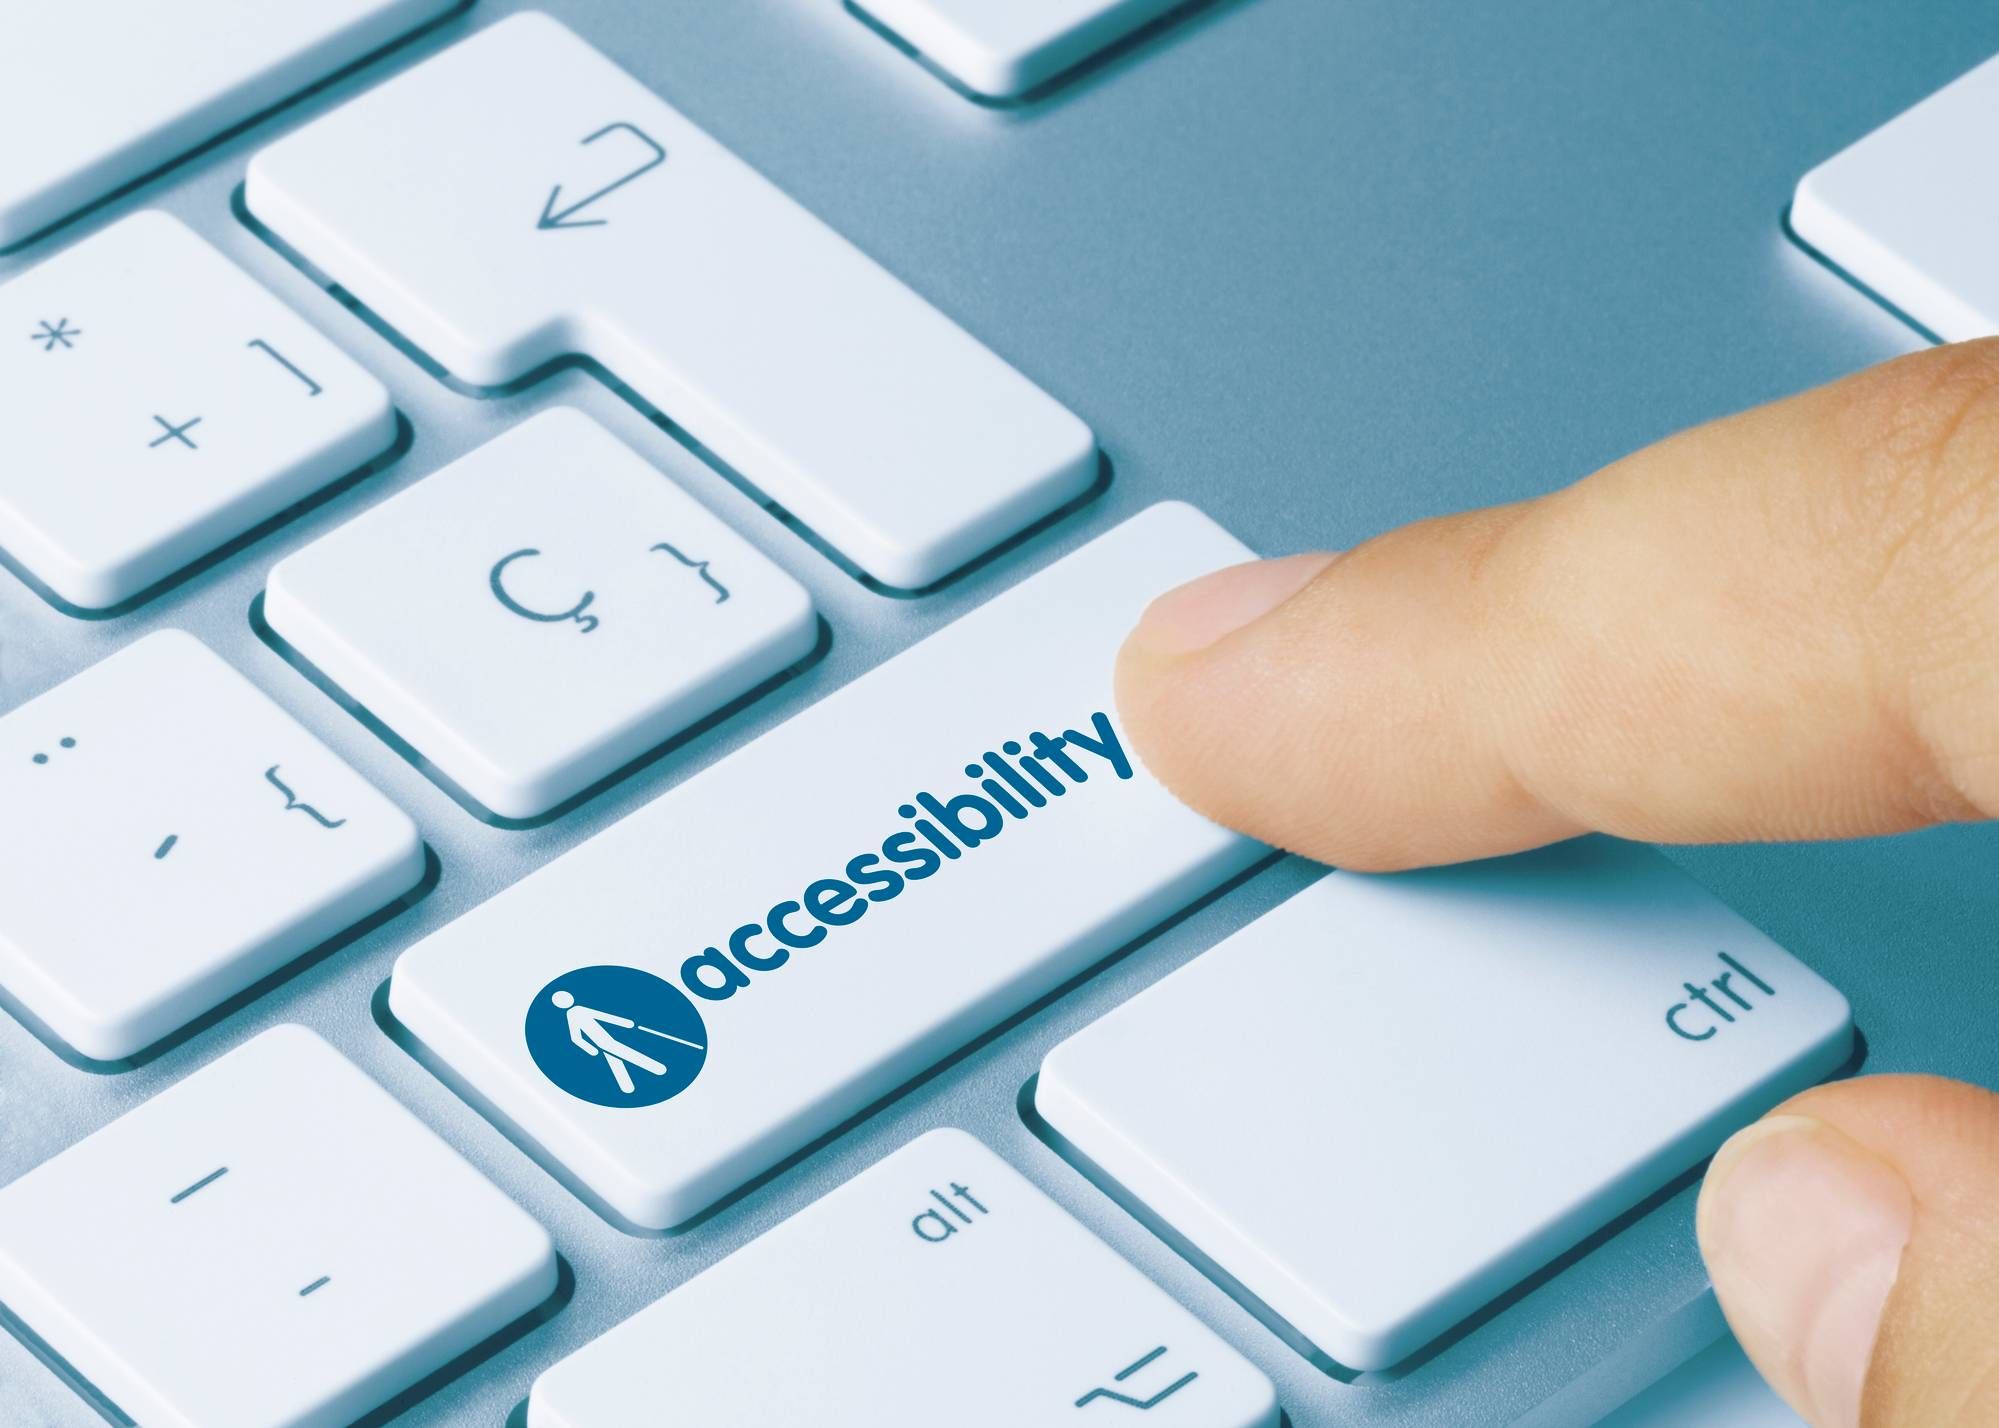 Consumers claim that the Capillus website lacks accessibility features for blind users.